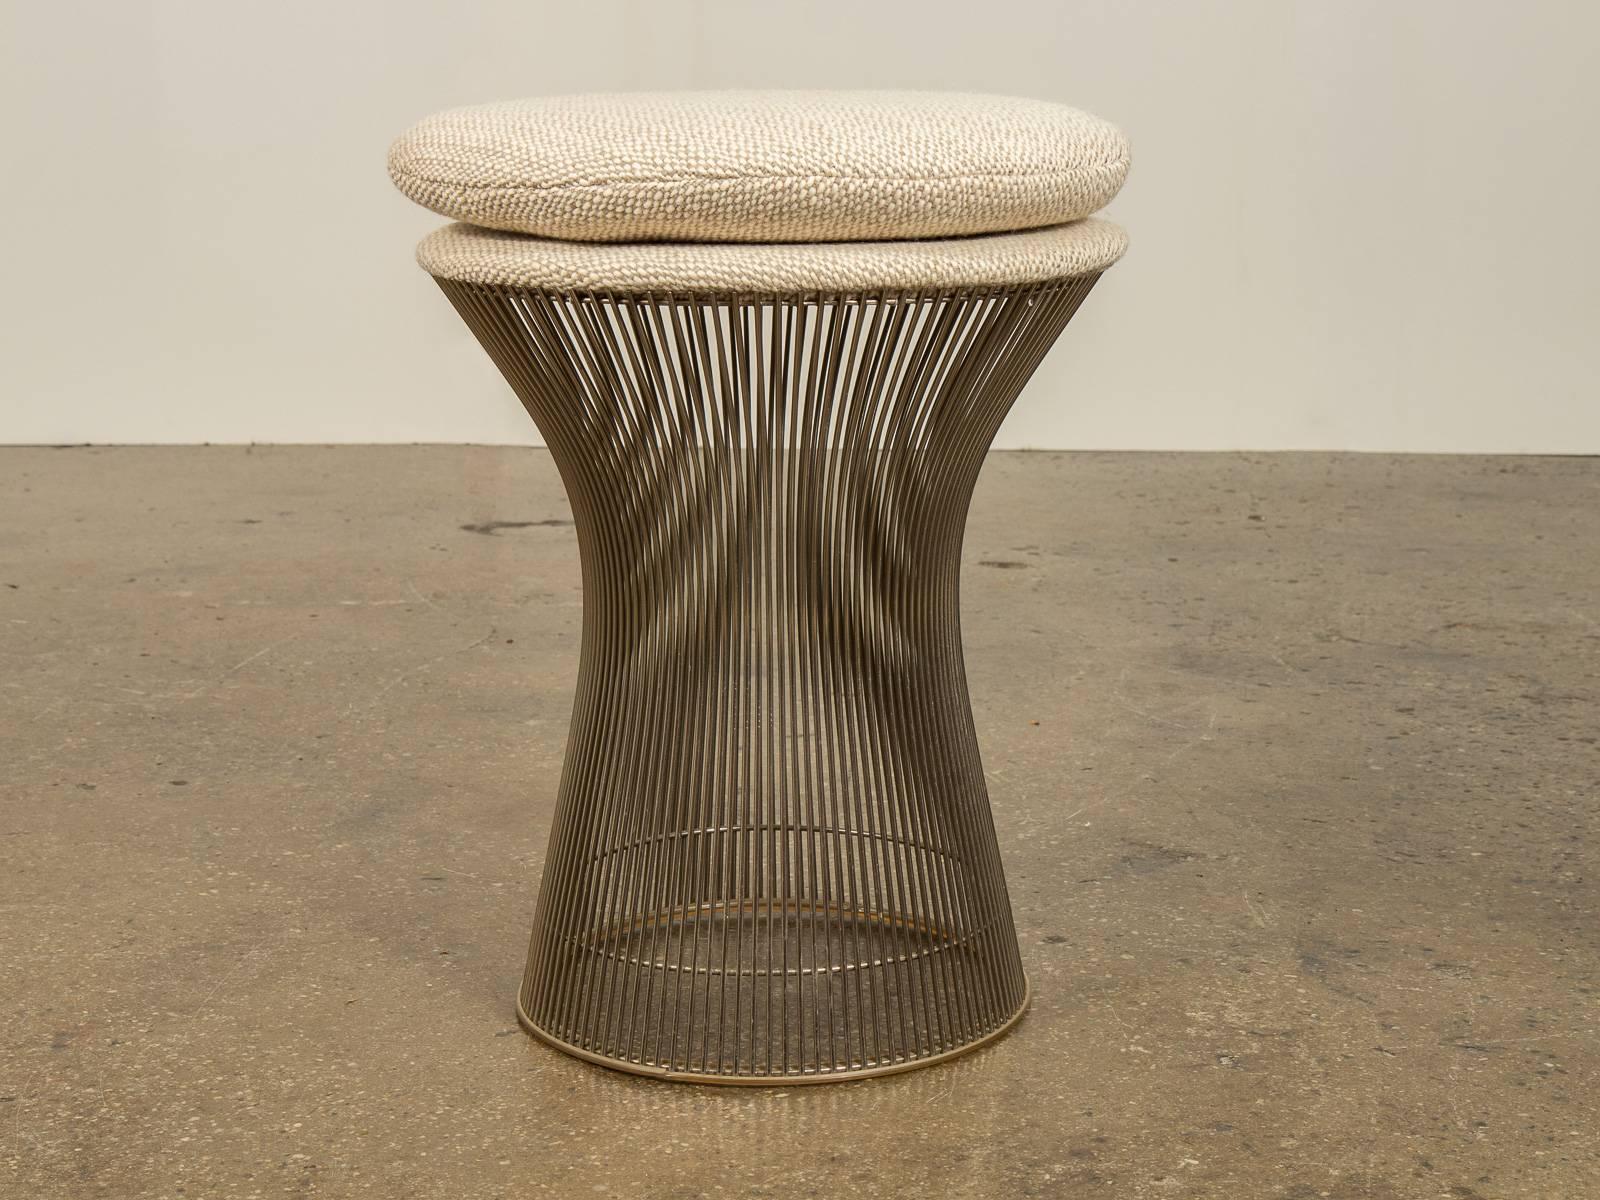 Industrial and organic steel wire stool by Warren Platner from the Platner Collection for Knoll, after 1966. Newly upholstered in a creamy, textural wool. In excellent condition. Currently in stock and can ship out in 2-3 days.

Measures: 17